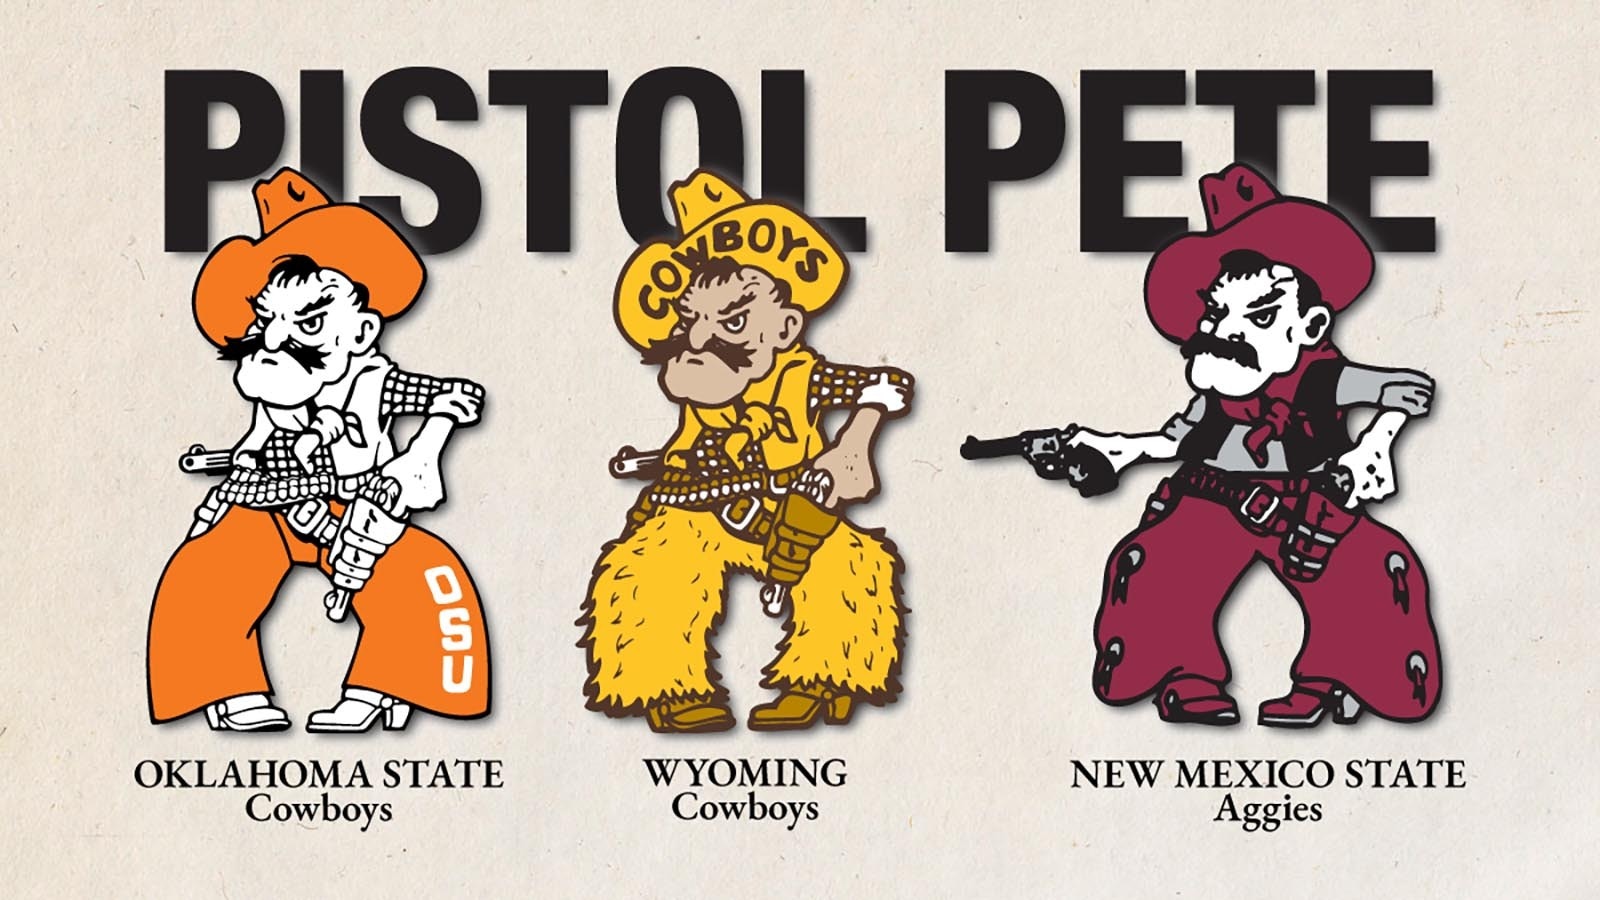 While Oklahoma State University and University of Wyoming legally worked out their claims to Pistol Pete, there wasn't room for another when New Mexico State University tried to horn in on the mascot.